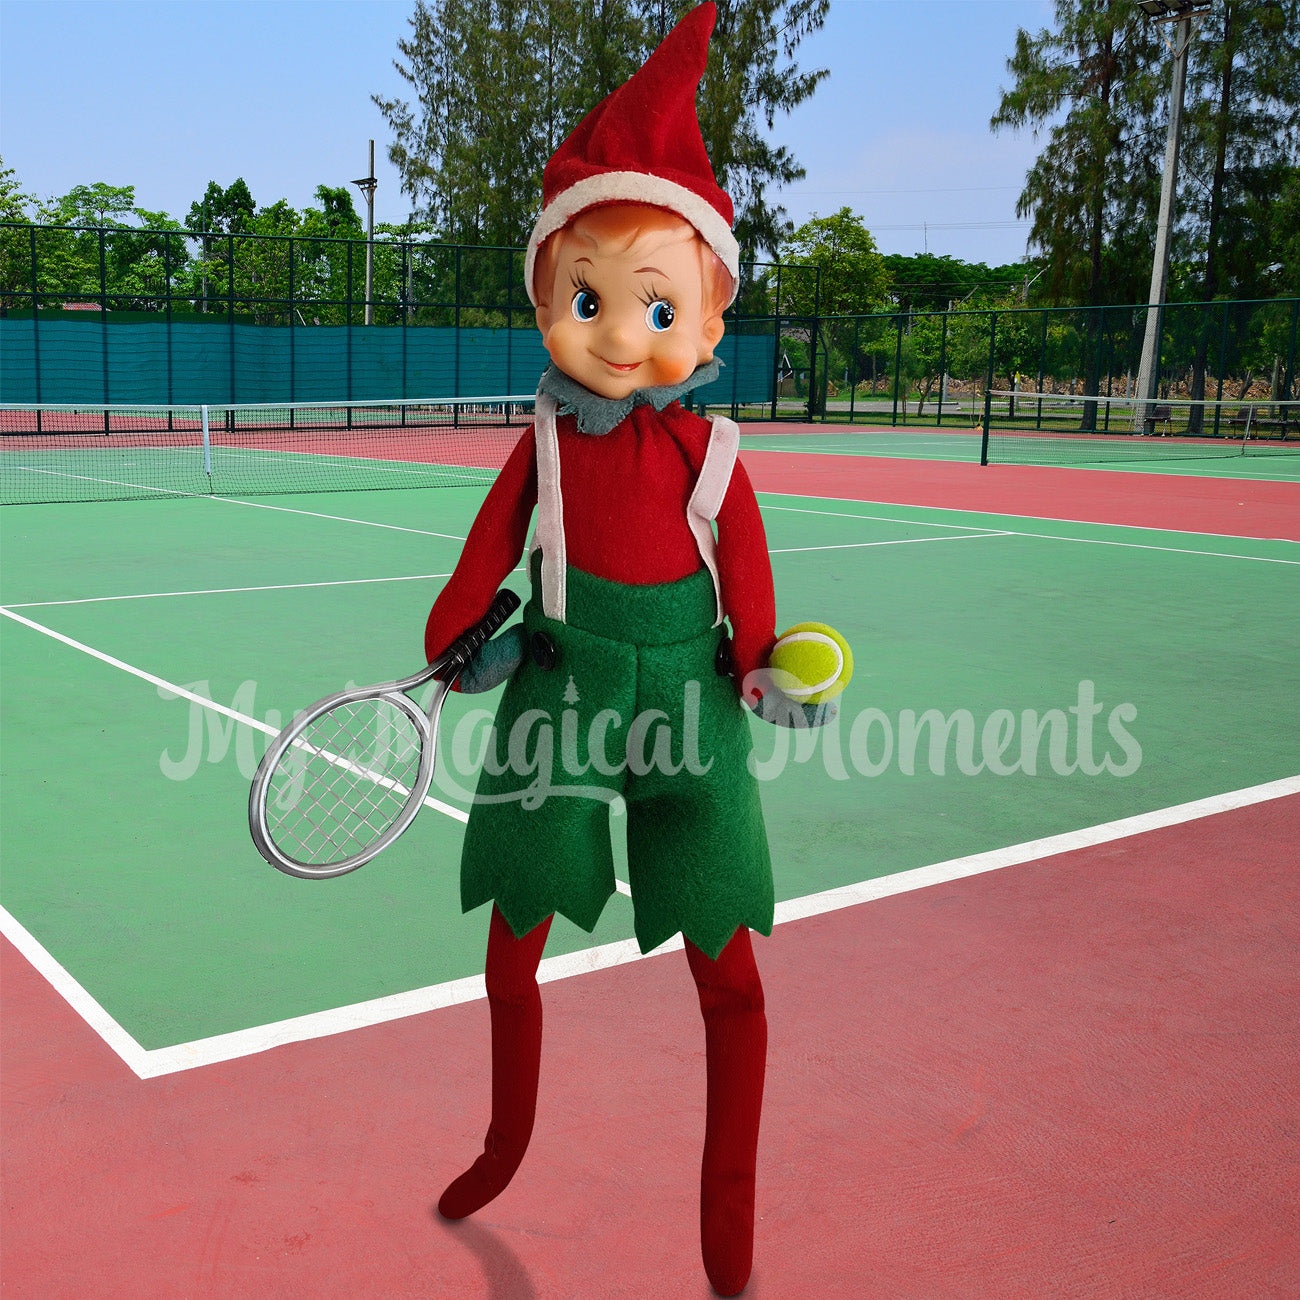 Elf playing tennis on a court